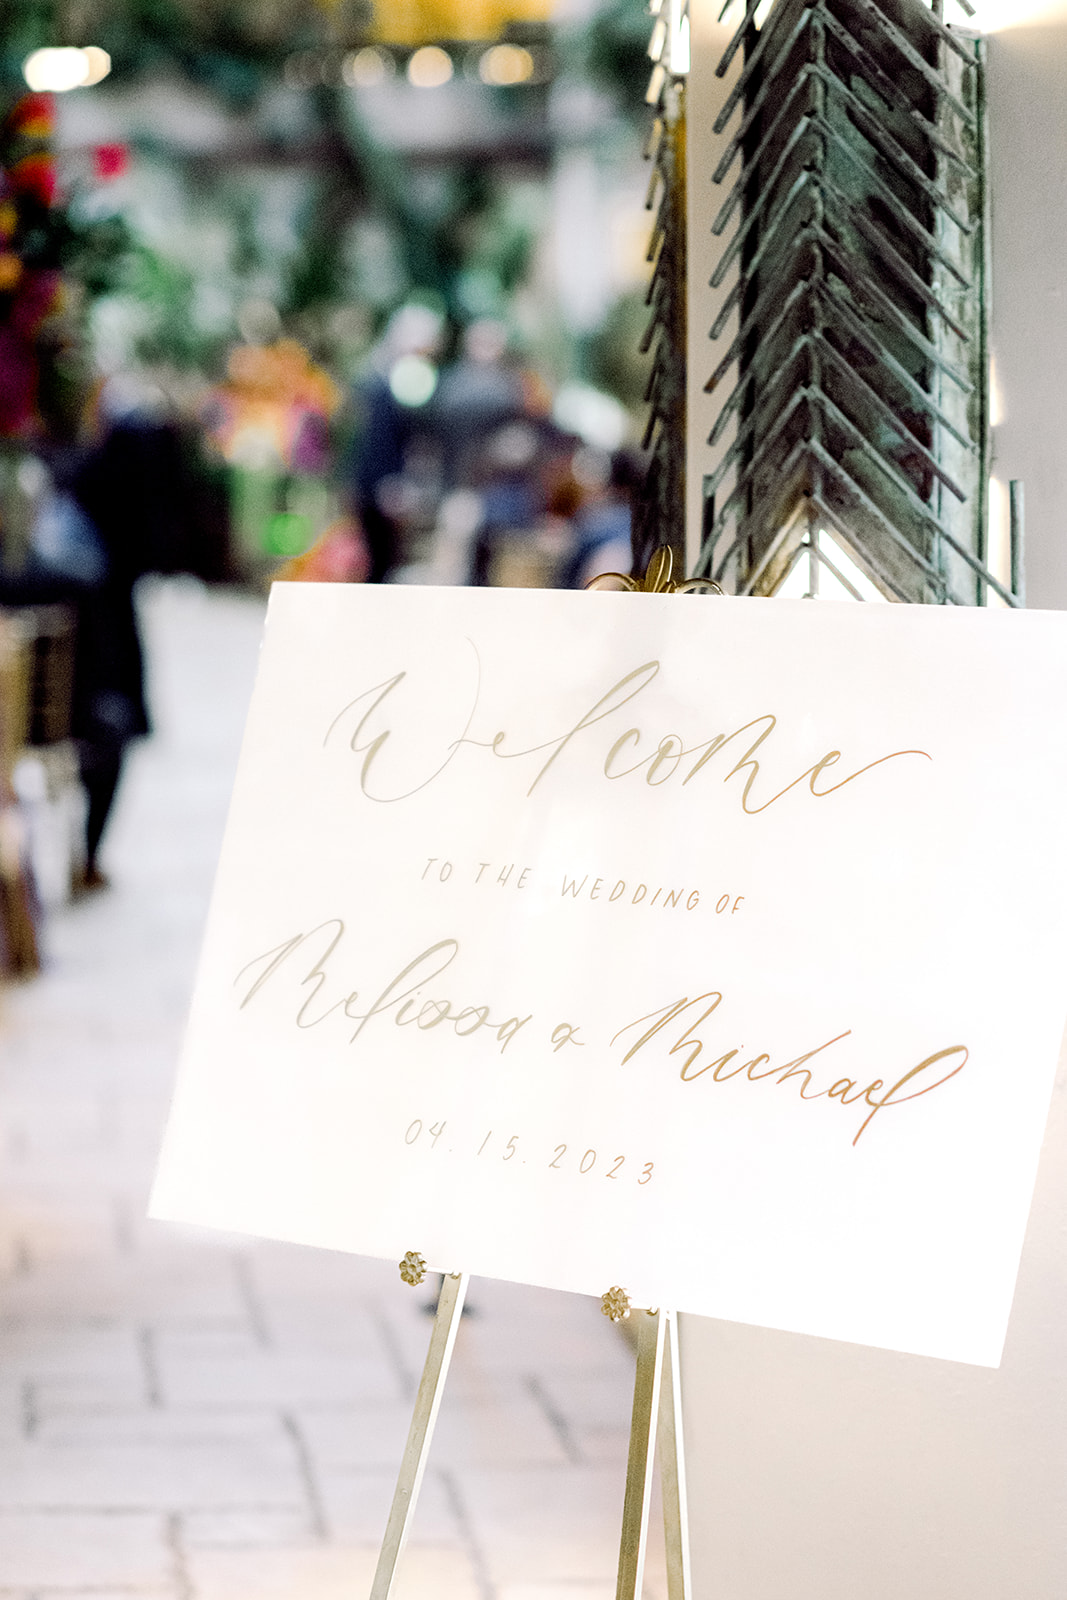 Welcome sign at ceremony site at Mayfair House Hotel & Garden in Miami on wedding day.